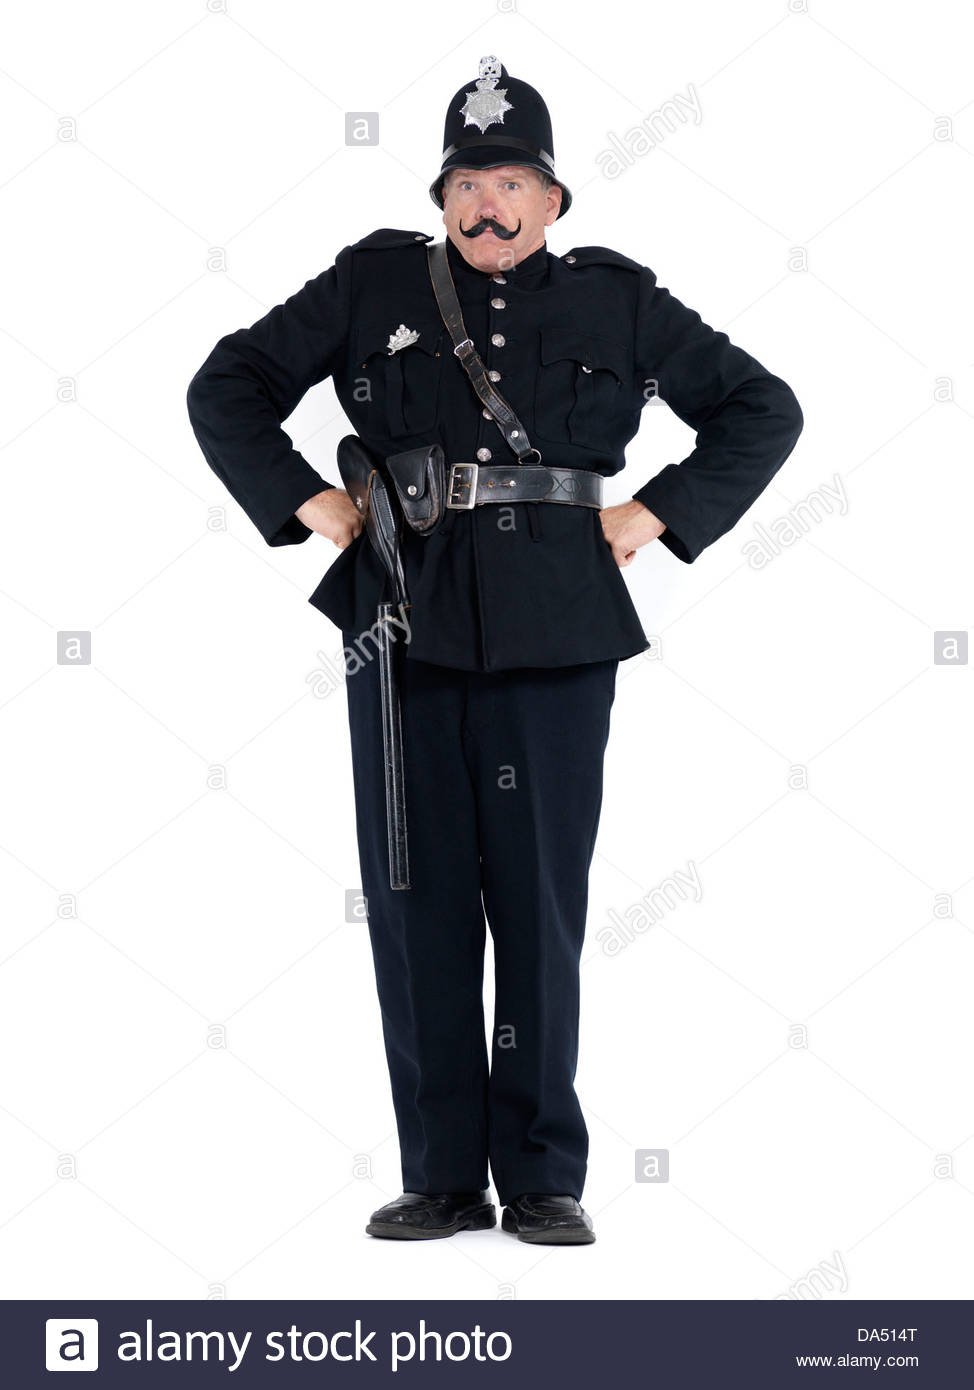 Humorous Portrait Of A Keystone Cop Vintage Police Officer Stock